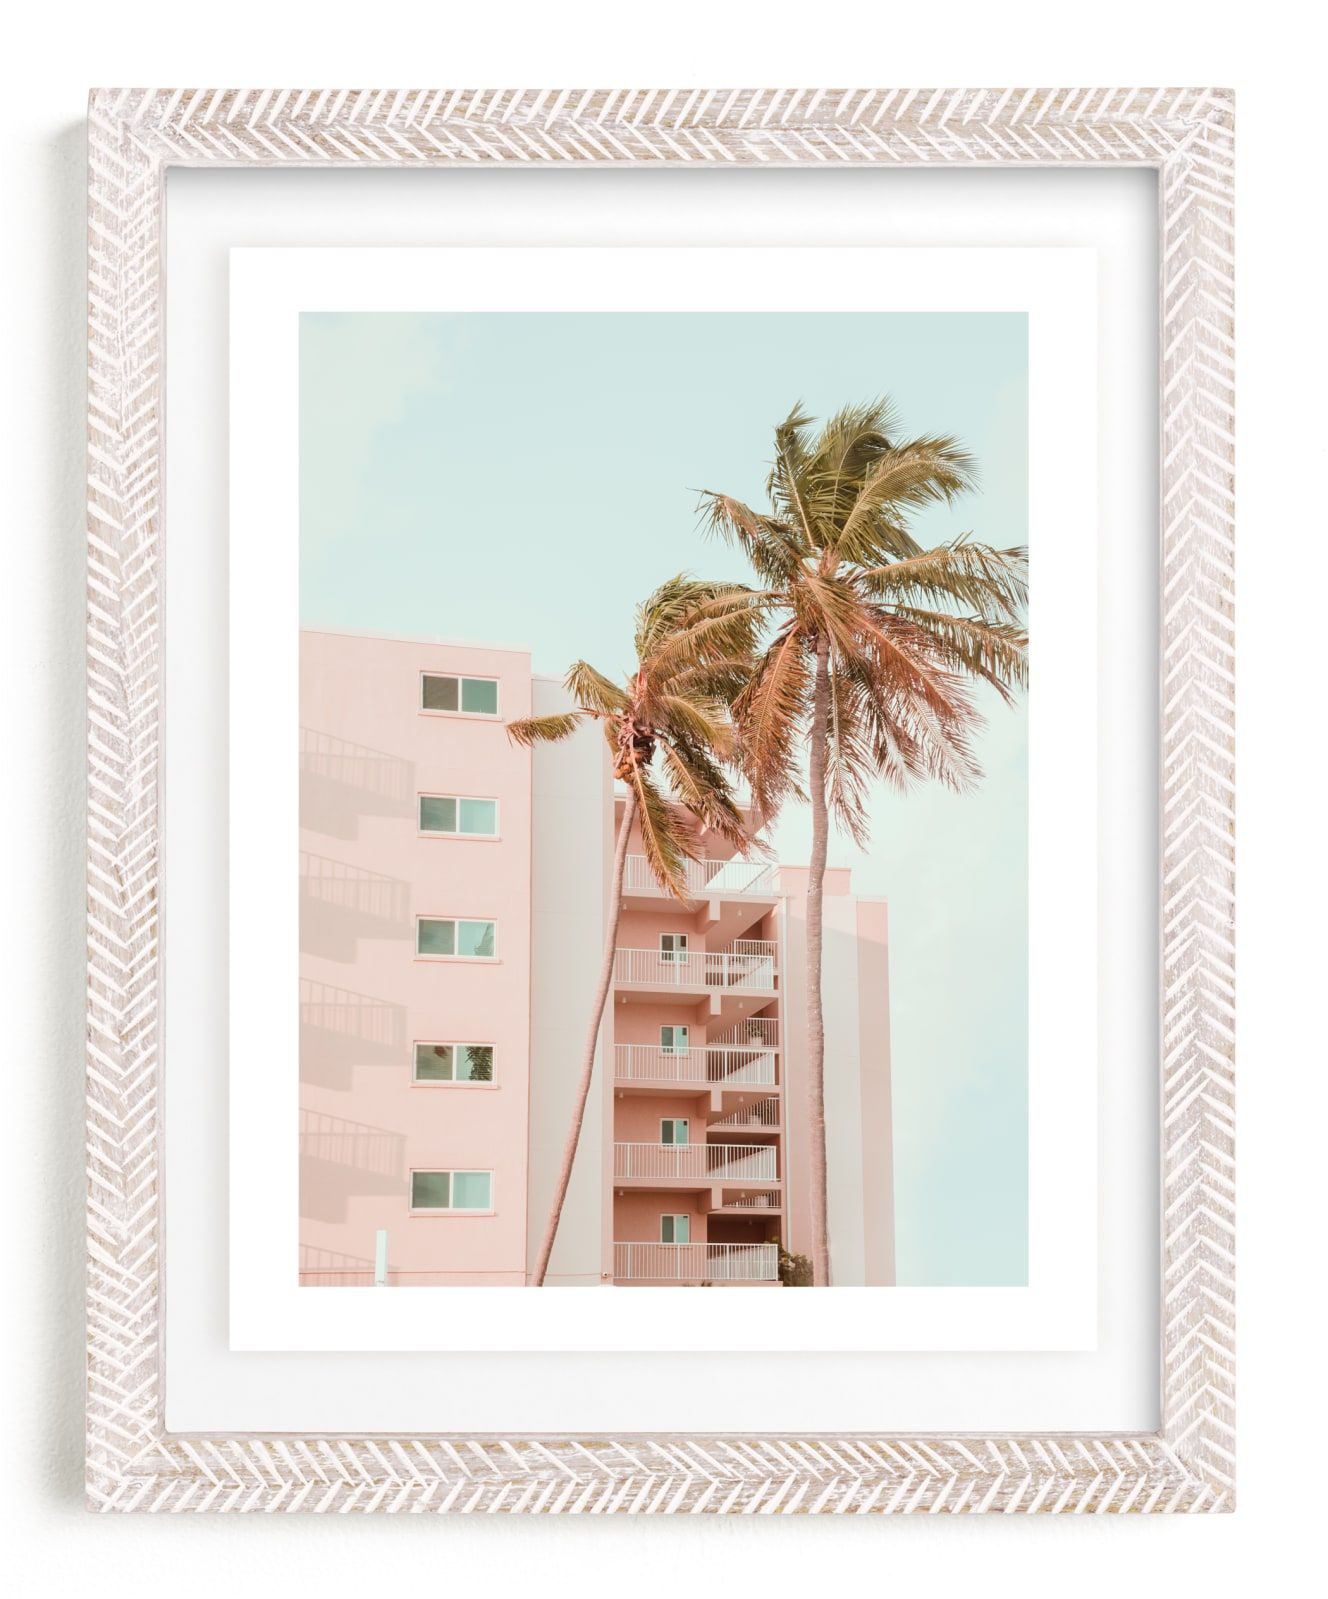 "Pastel Holidays" - Photography Limited Edition Art Print by Rega. | Minted